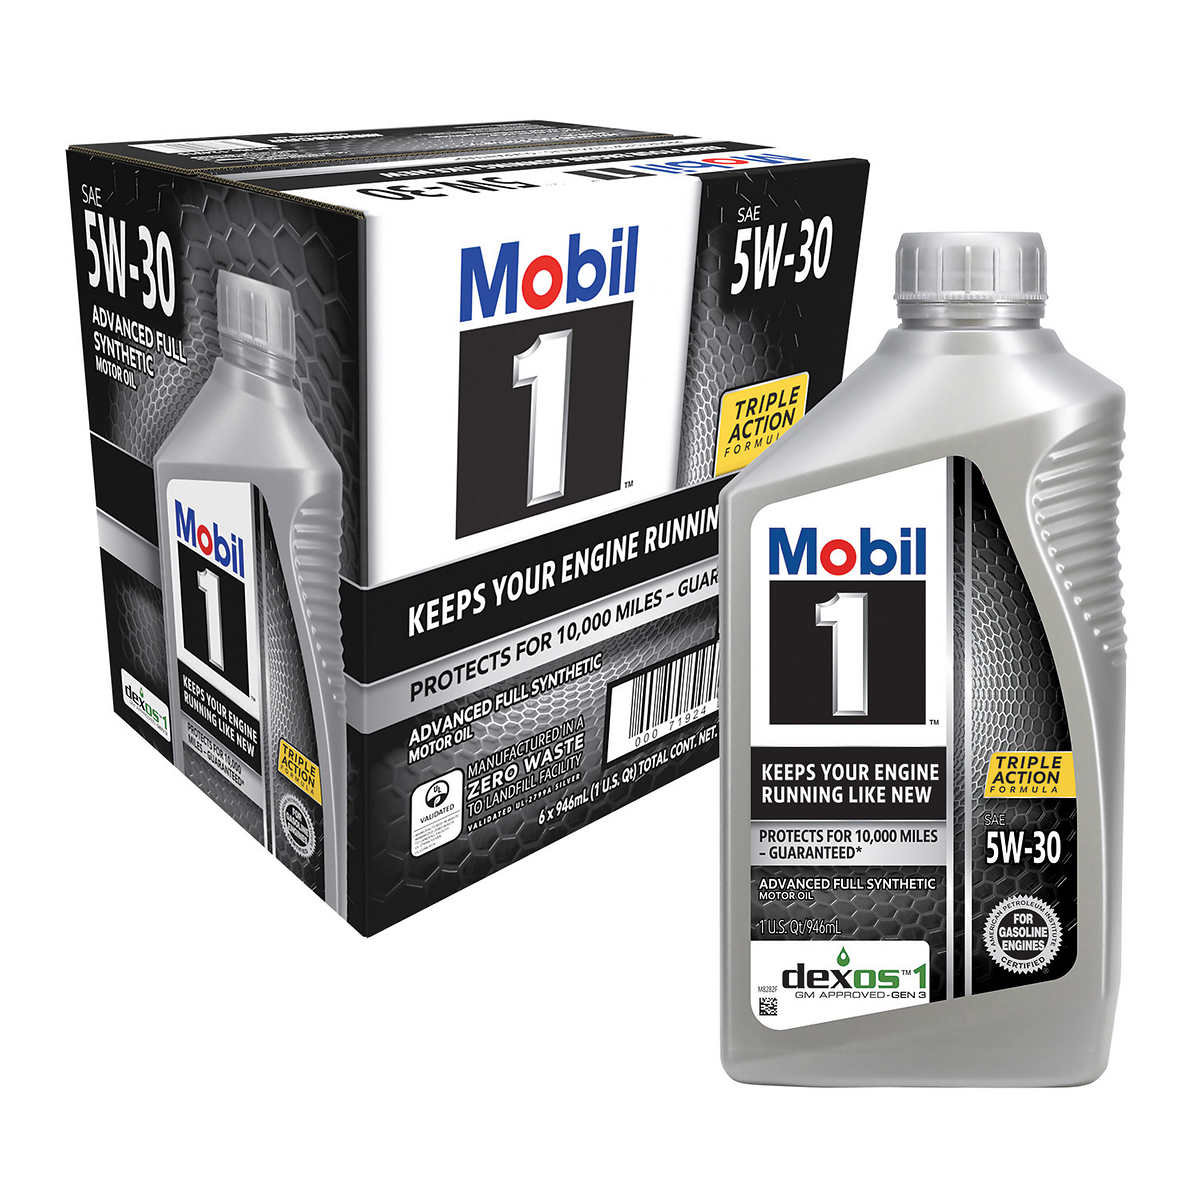 Tientallen band Universeel Mobil 1 Advanced Full Synthetic Motor Oil 5W-30, 1-Quart/6-Pack | Costco